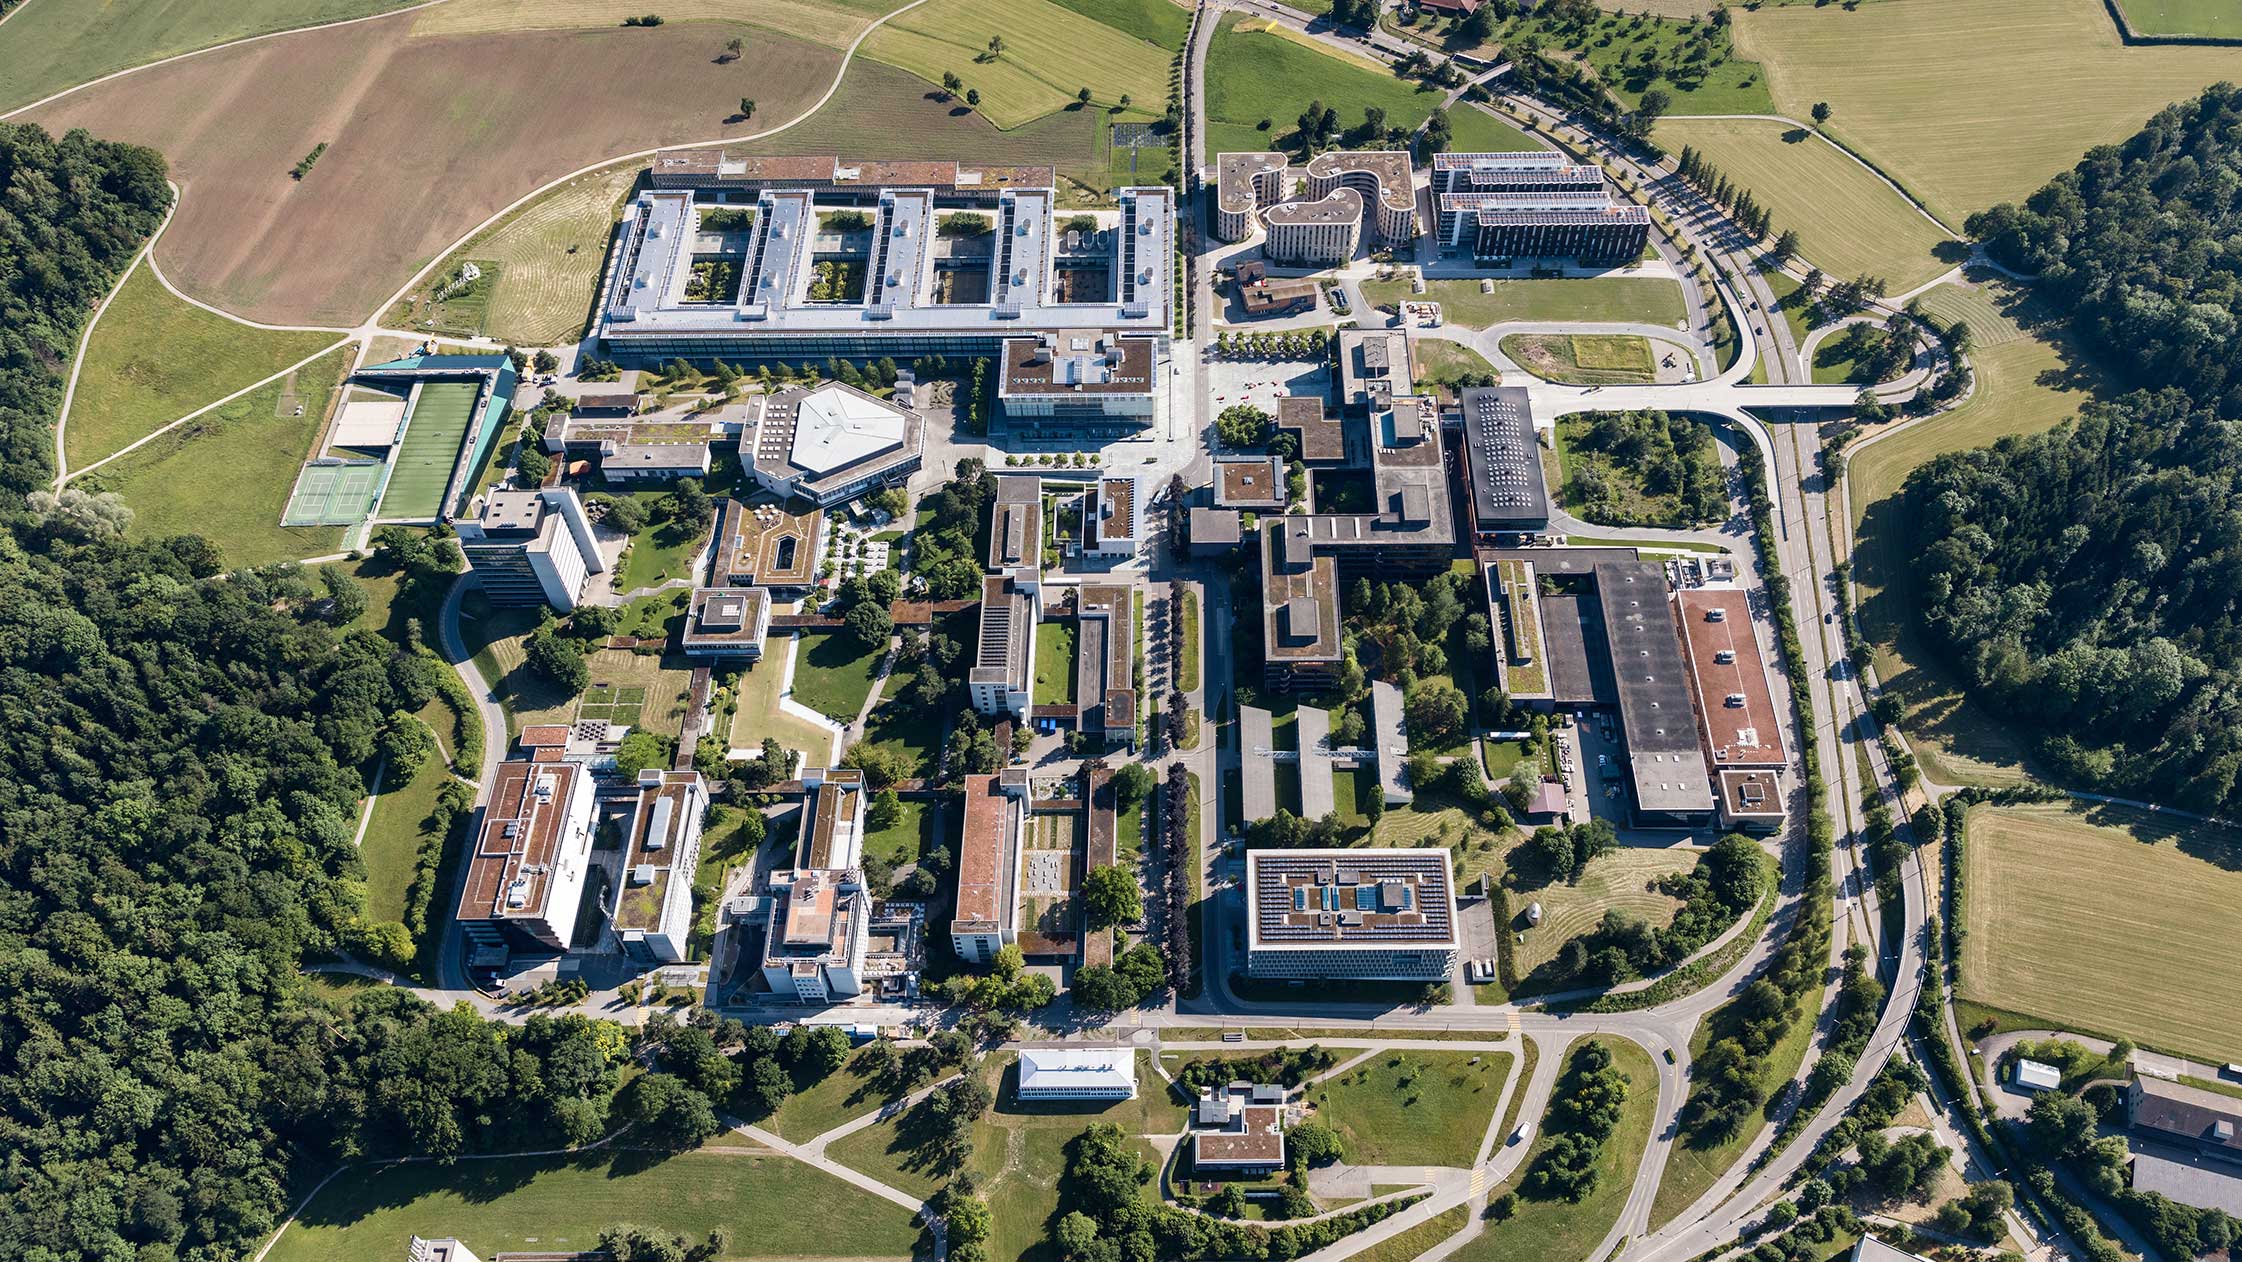 The photo shows the entire Hönggerberg campus from above.